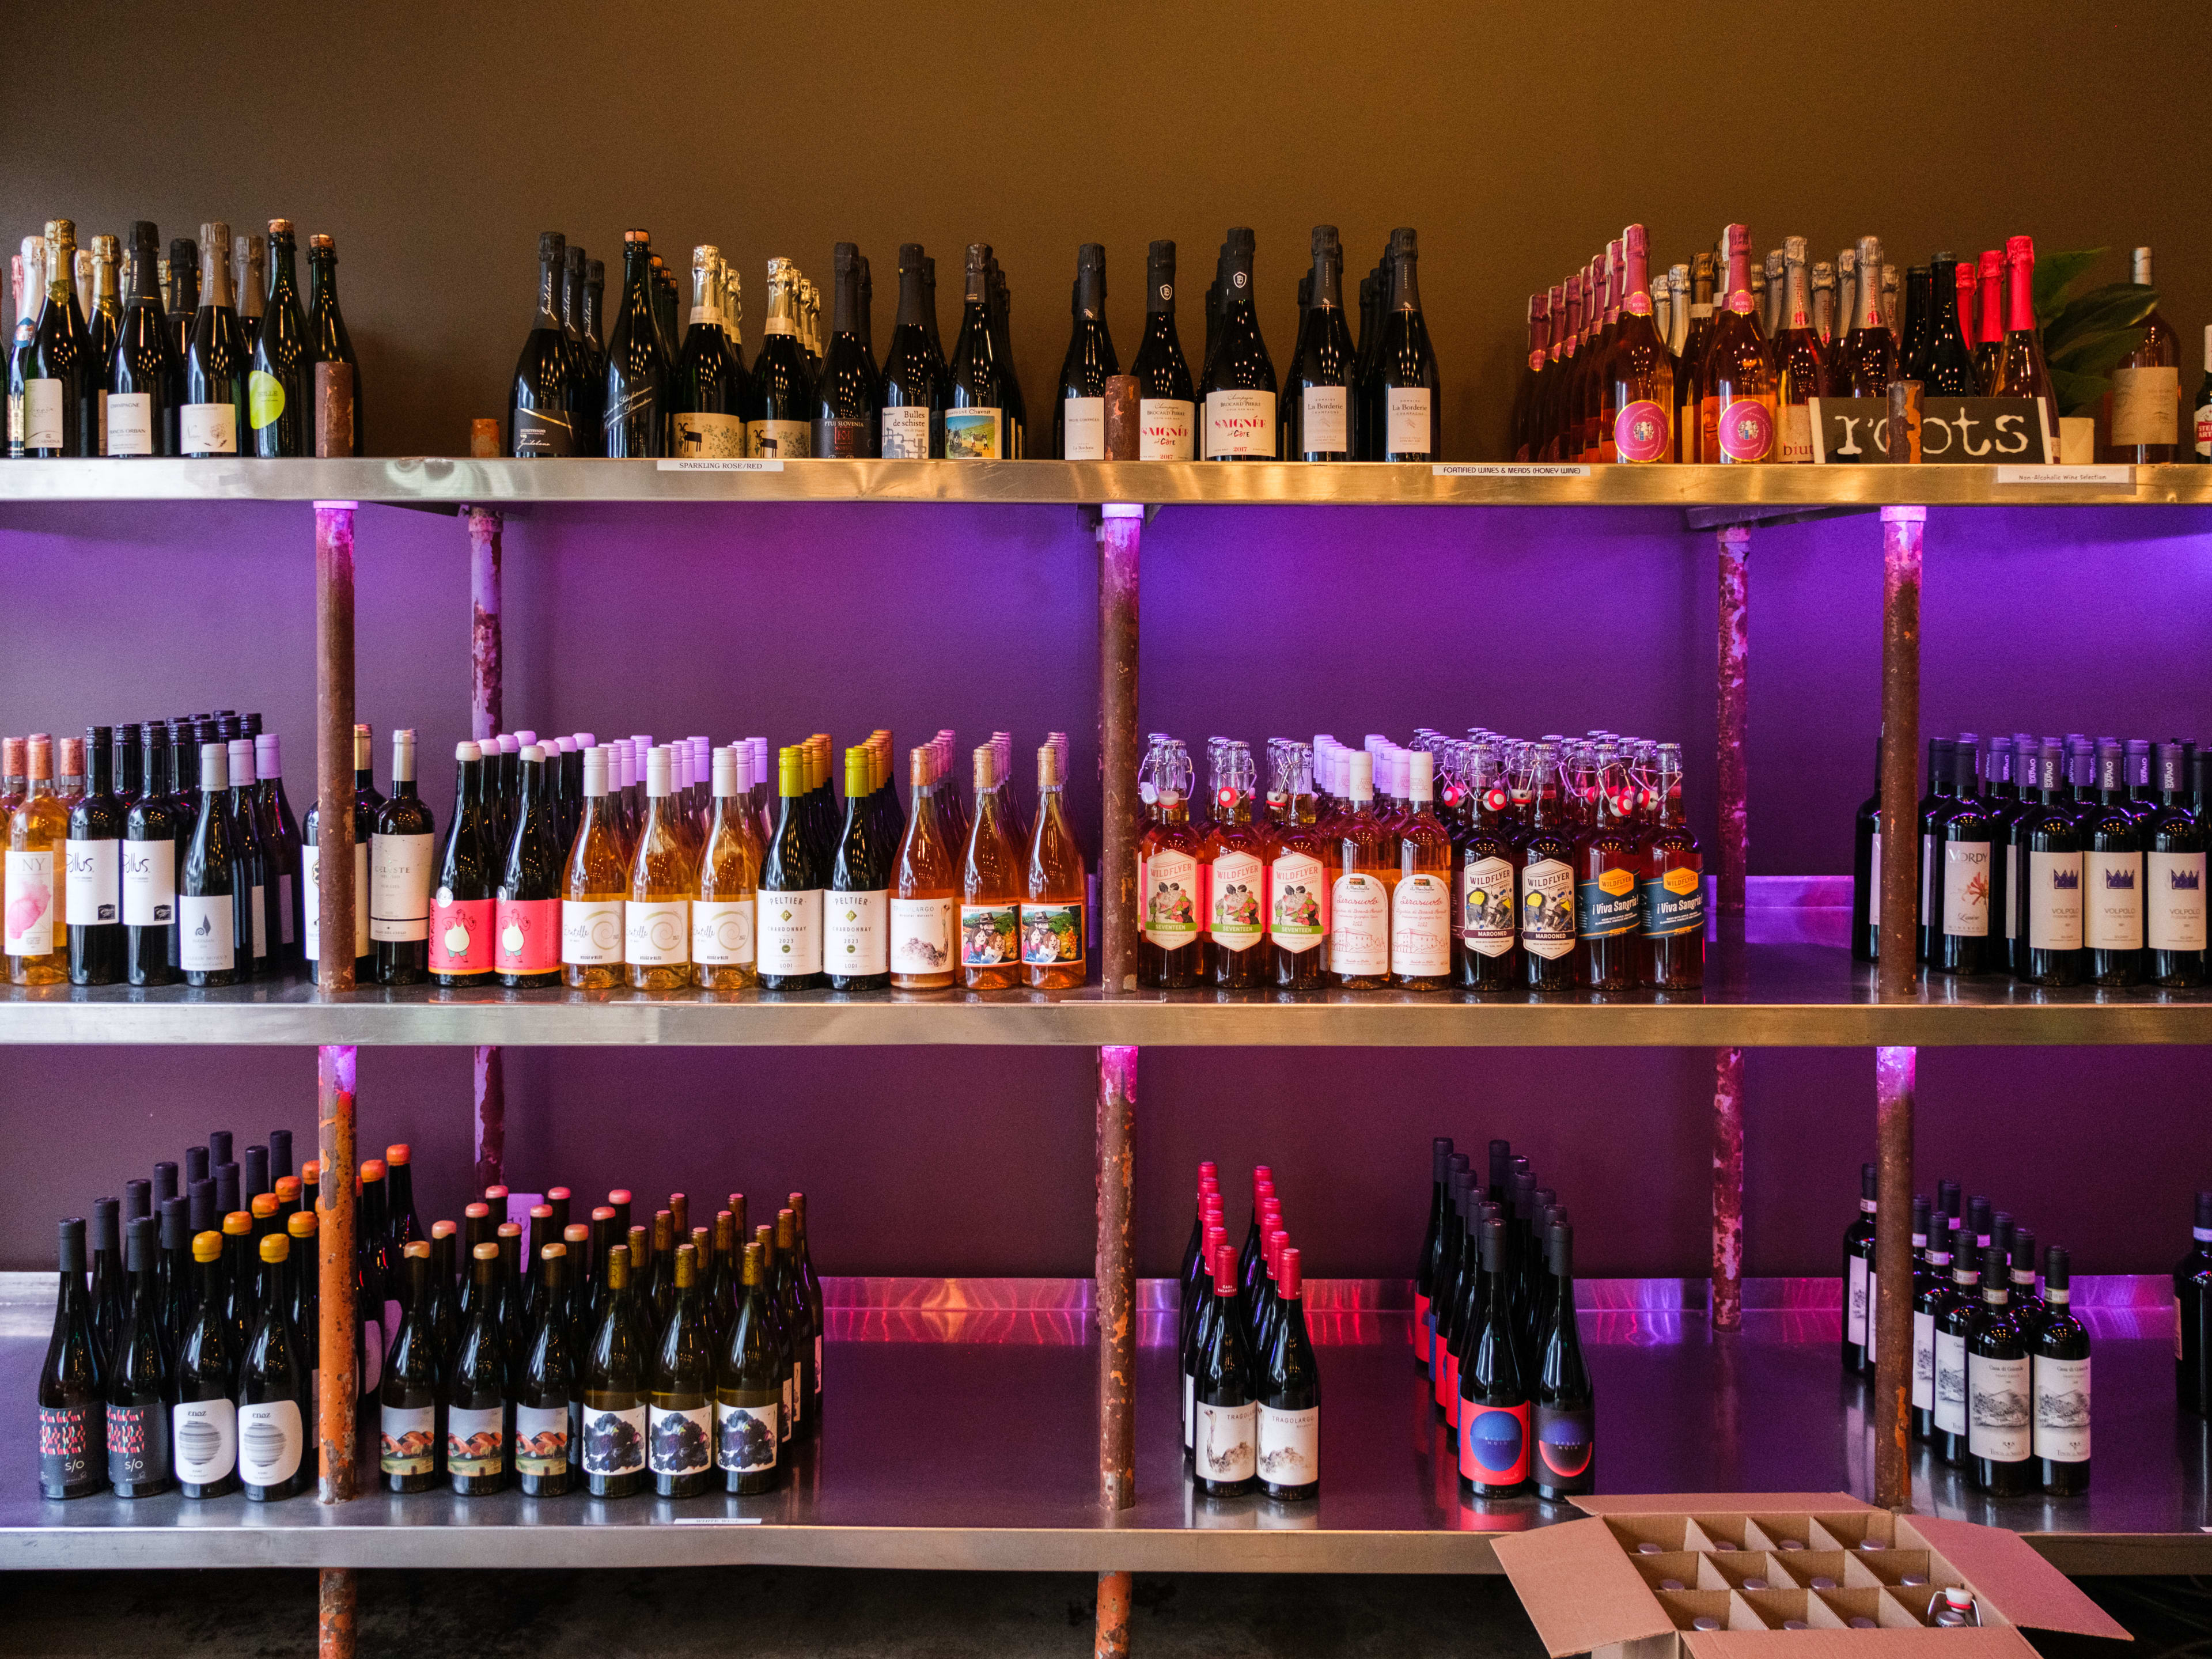 The bottle selection for purchase at Roots Wine Bar.